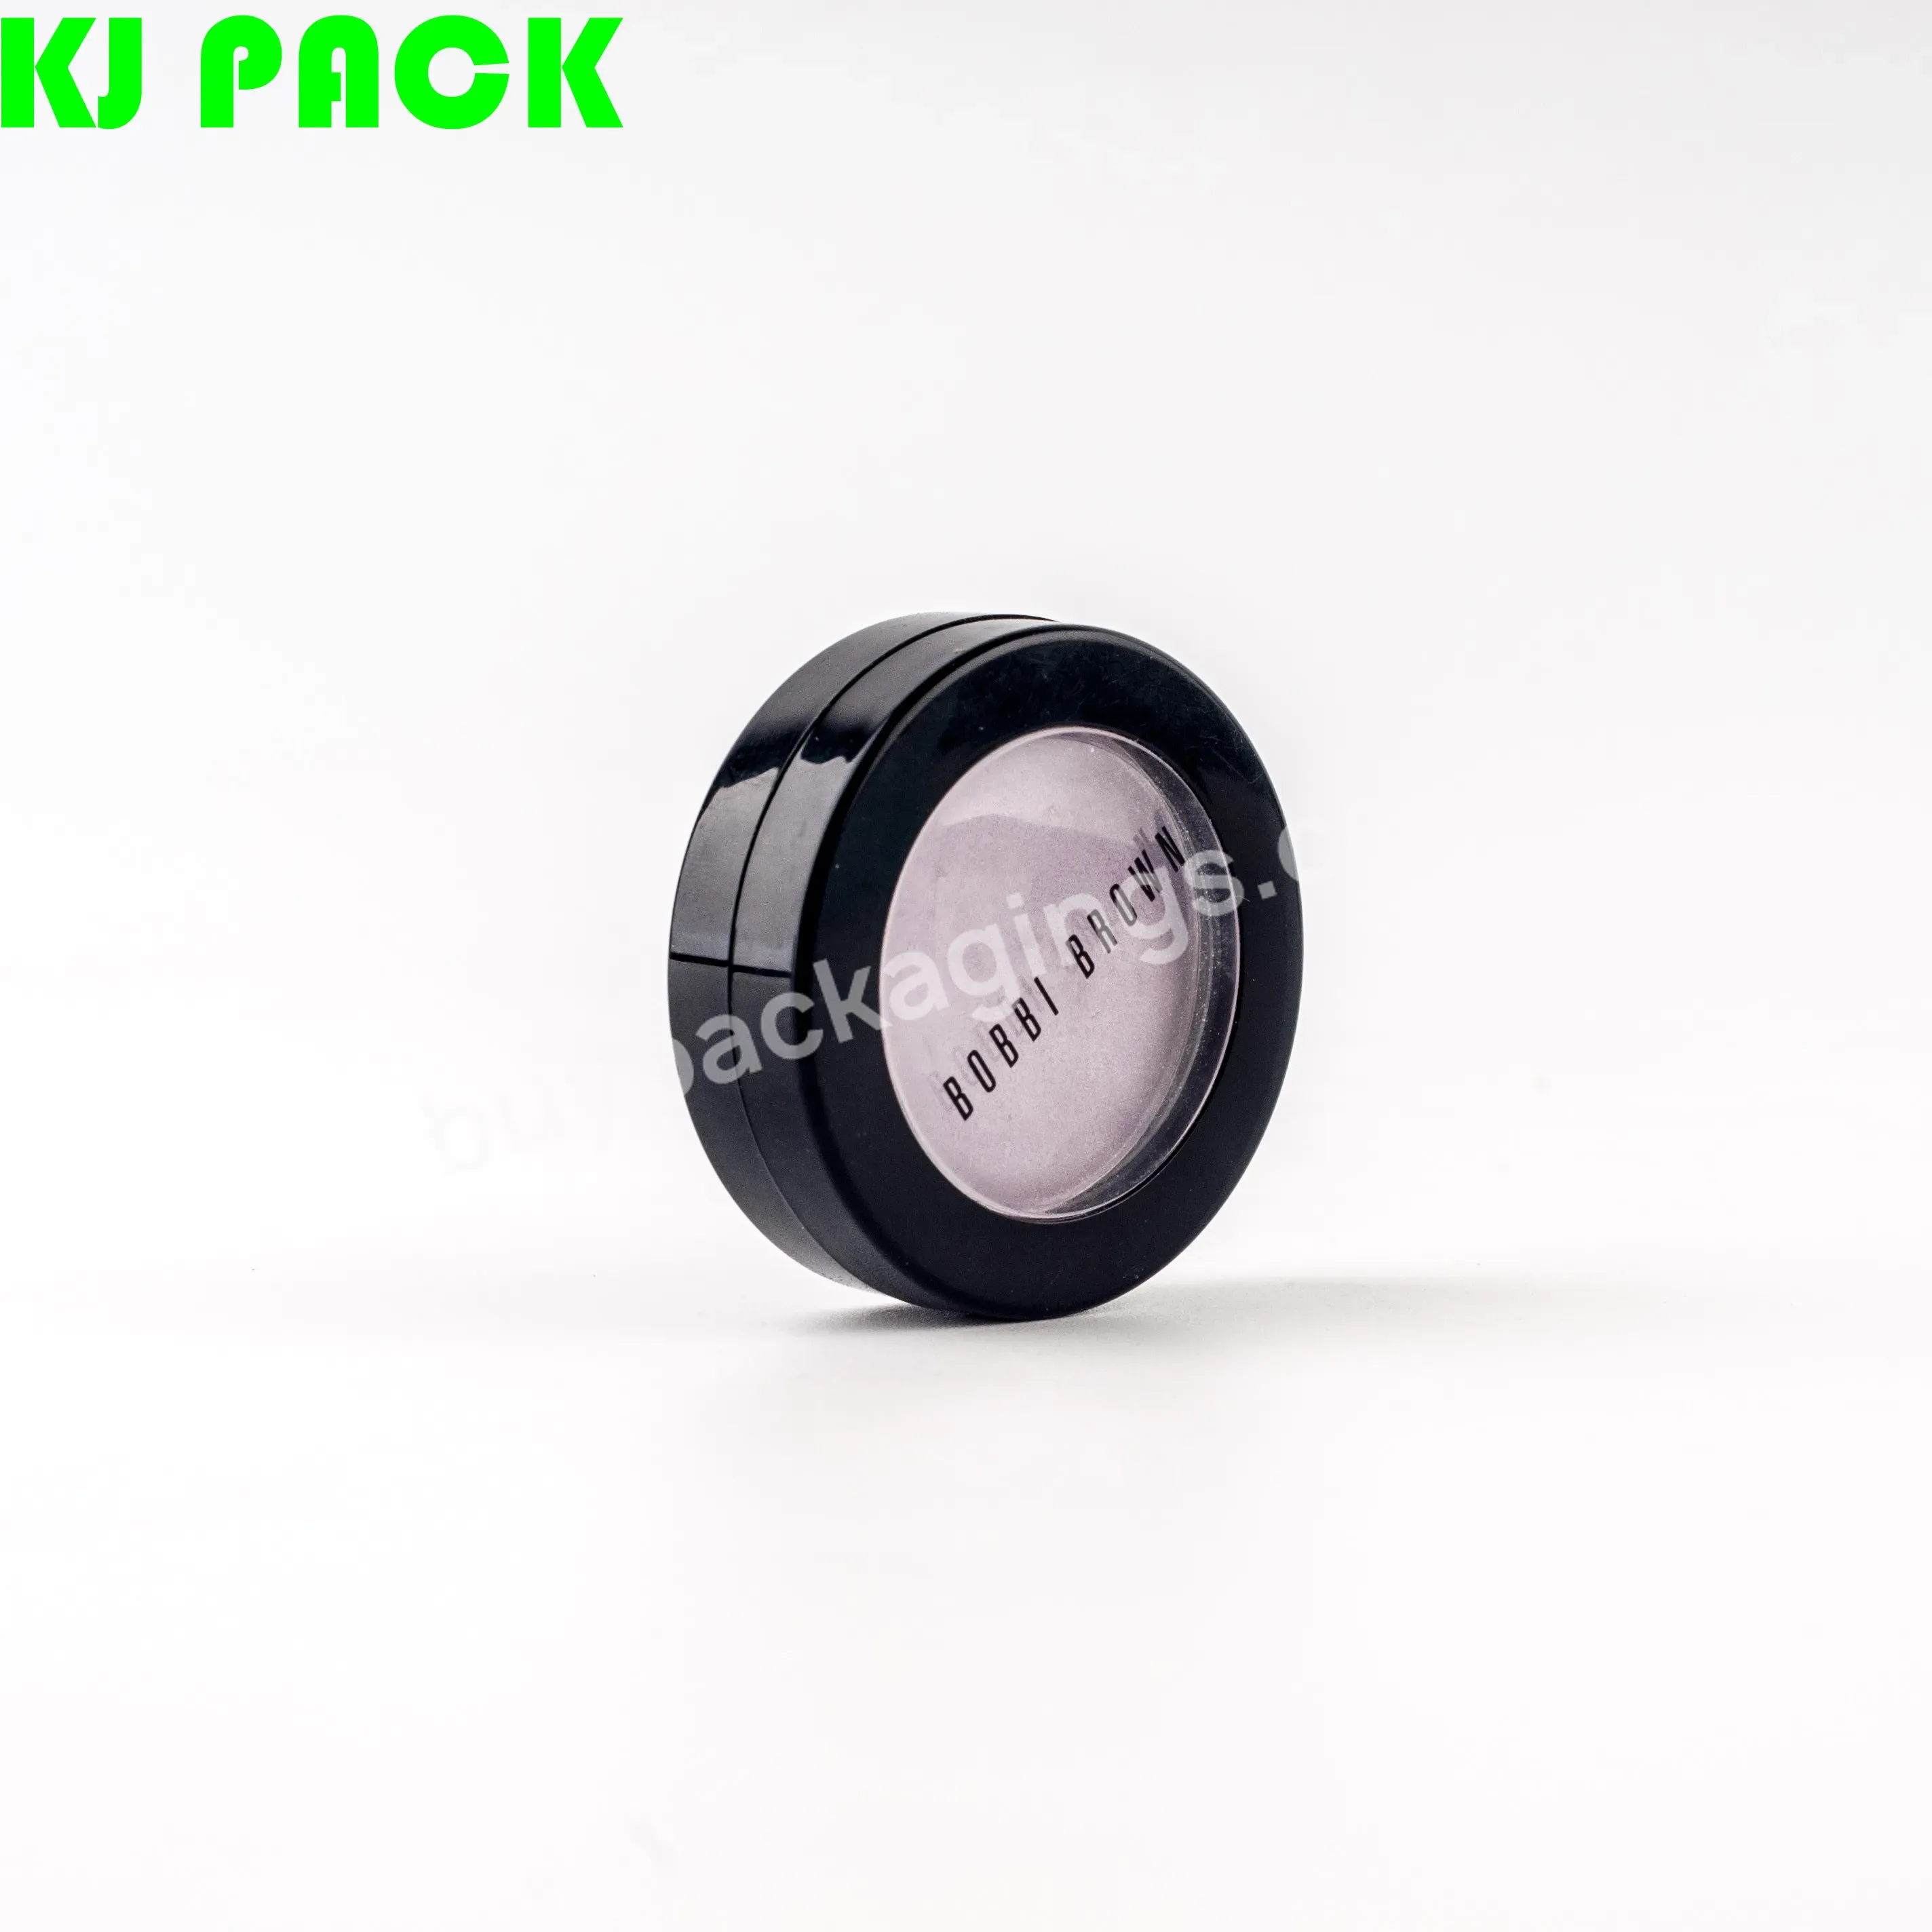 Single Cosmetic Blush Powder Case Blush Container Round Shape Empty With Clear Window - Buy Blush Powder Case,1 Pc Face Blush Powder Case,Blush Palette.